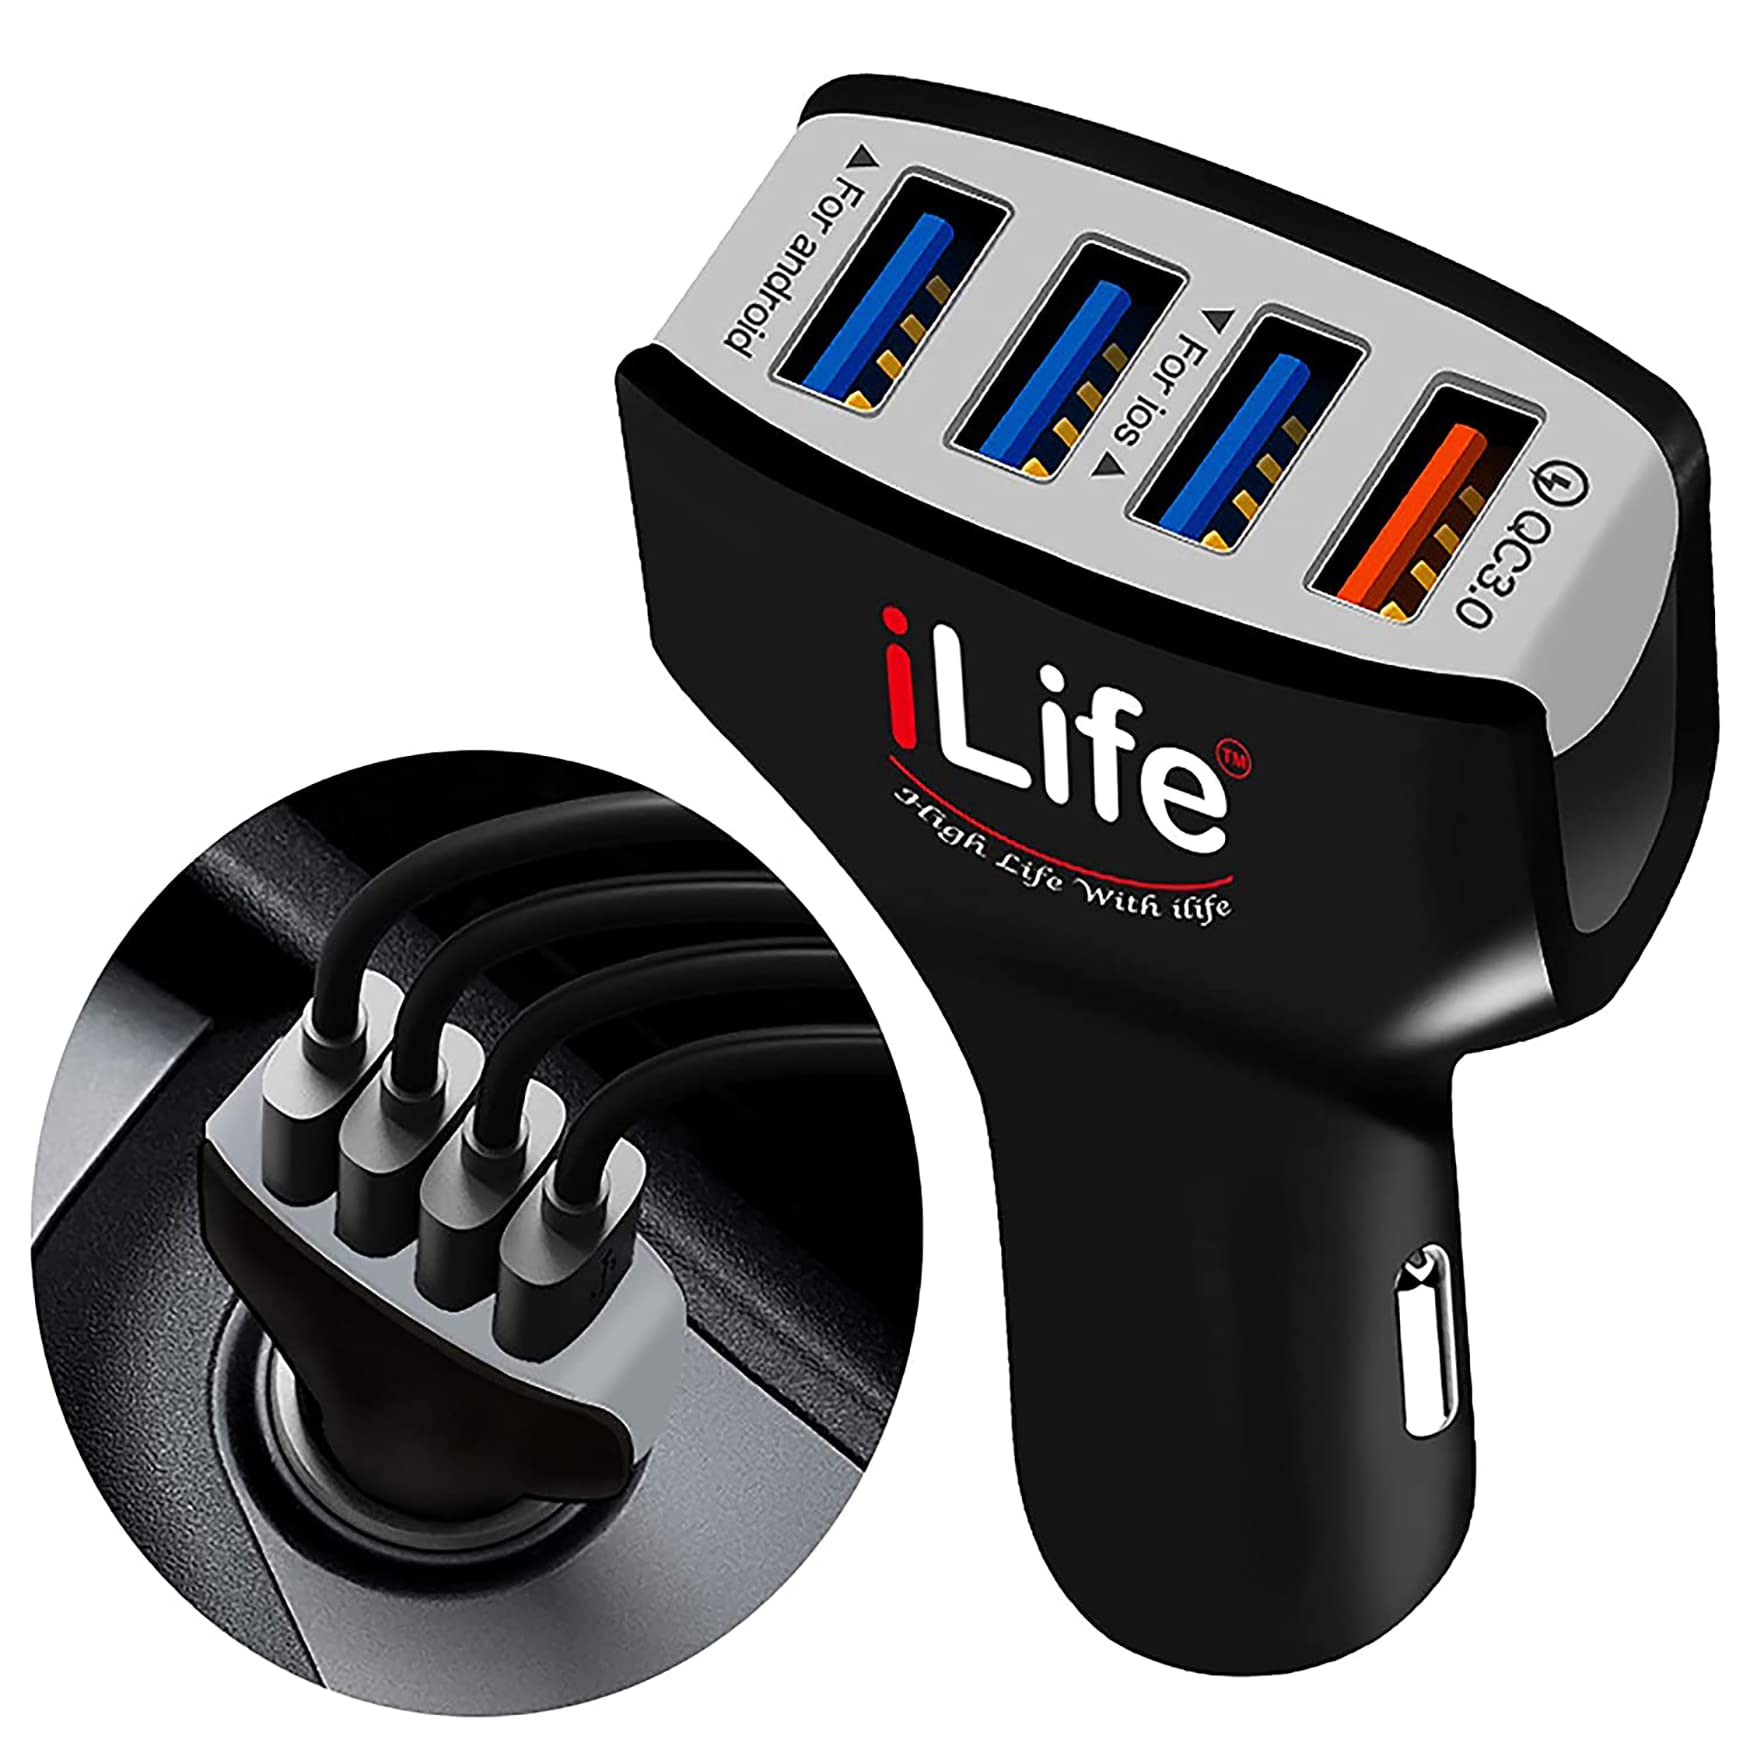 usb car charger ; multiport car charger